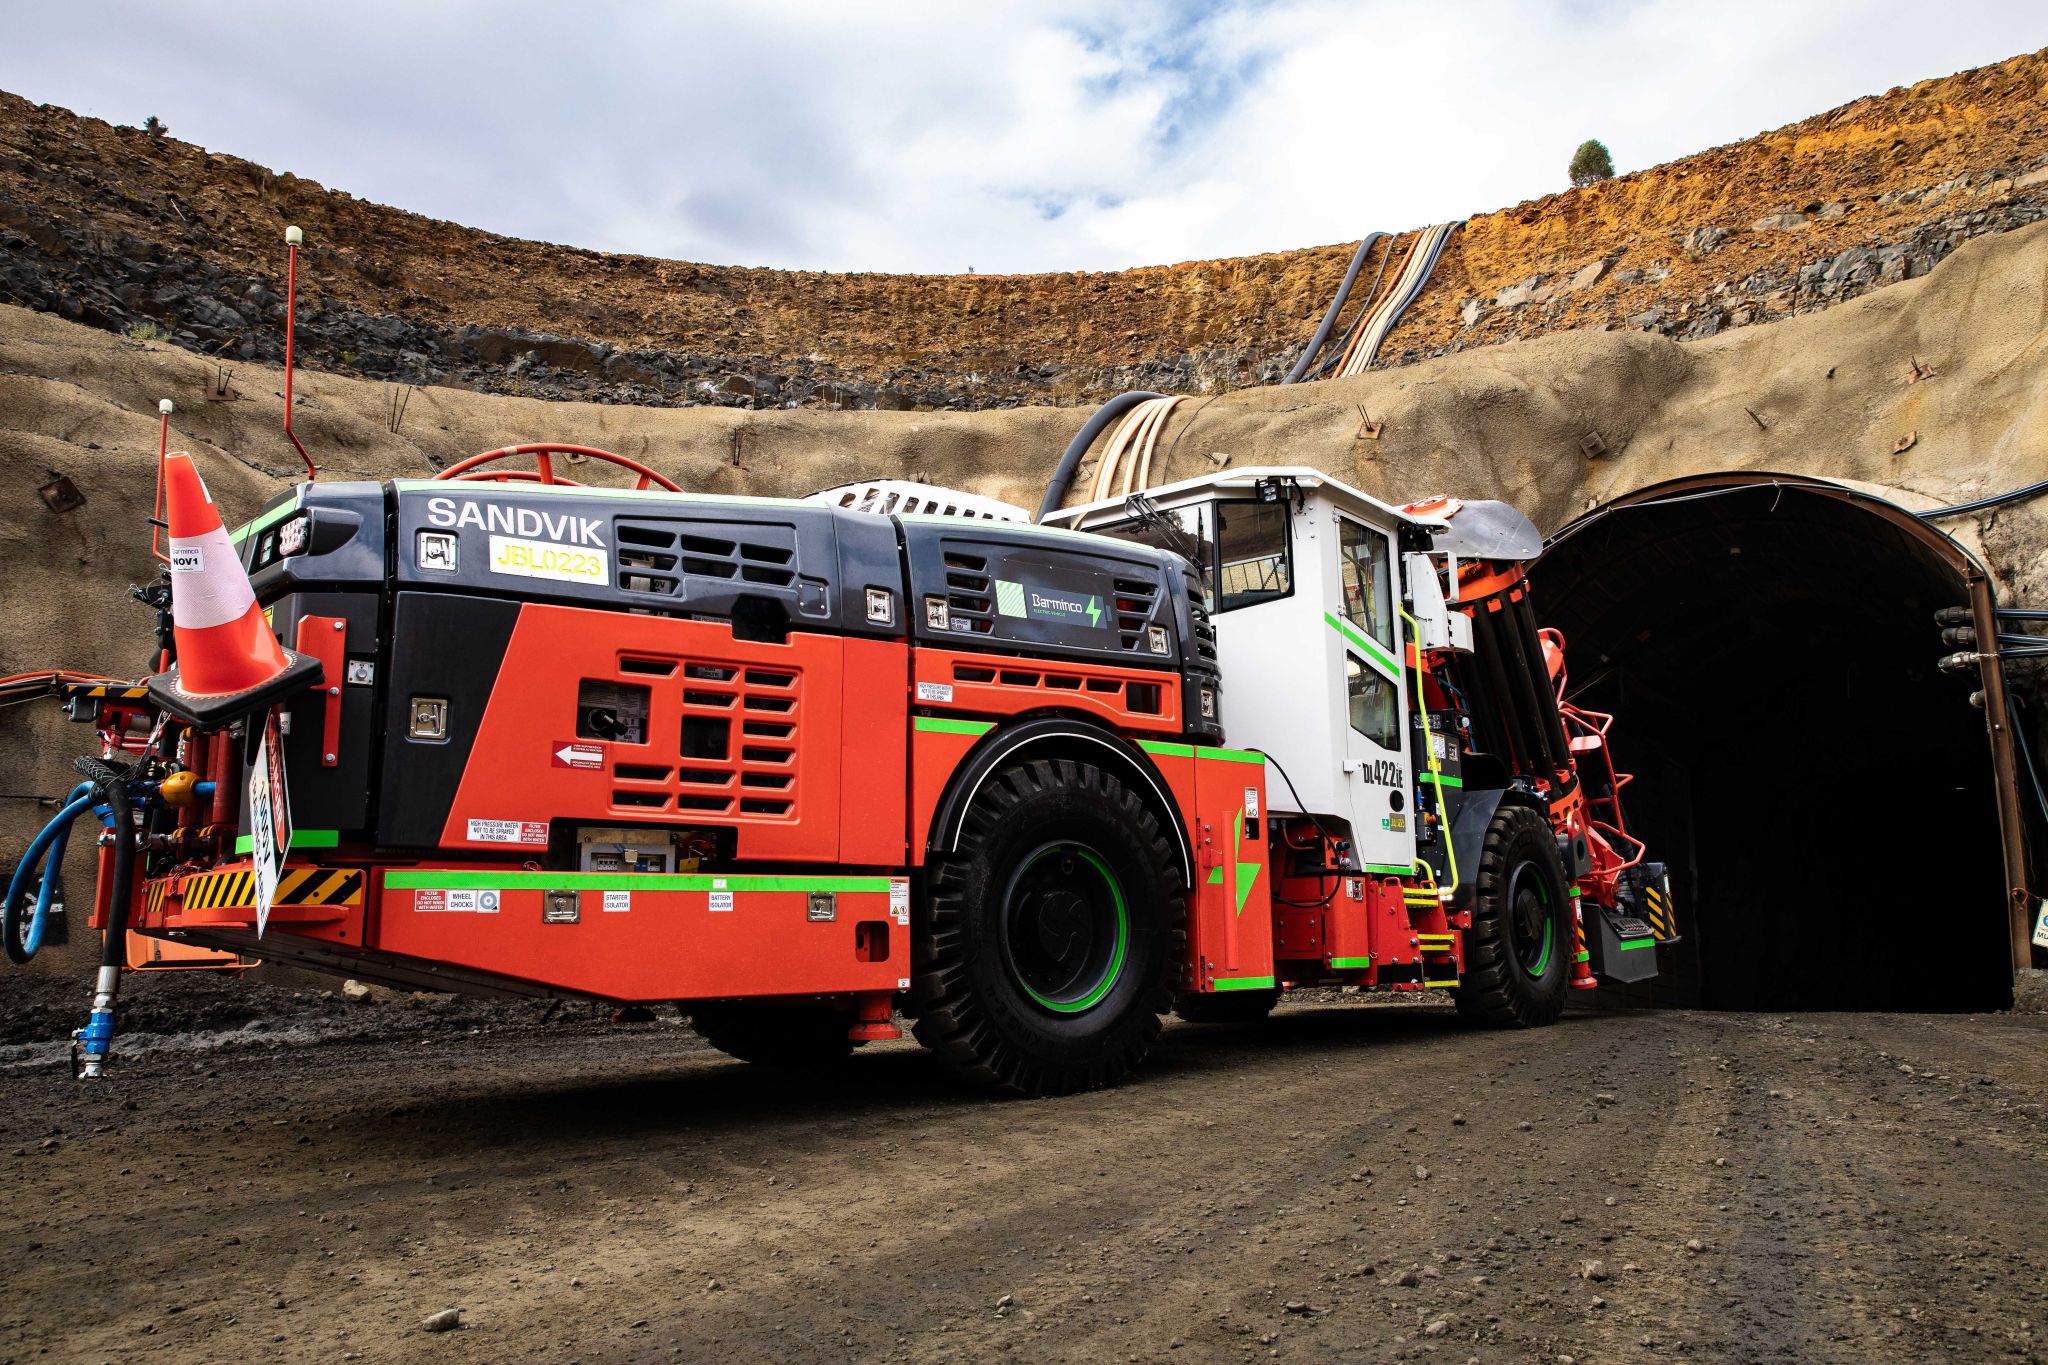 The Electric Mine Consortium calls time as it looks for members to take the electrification lead - International Mining